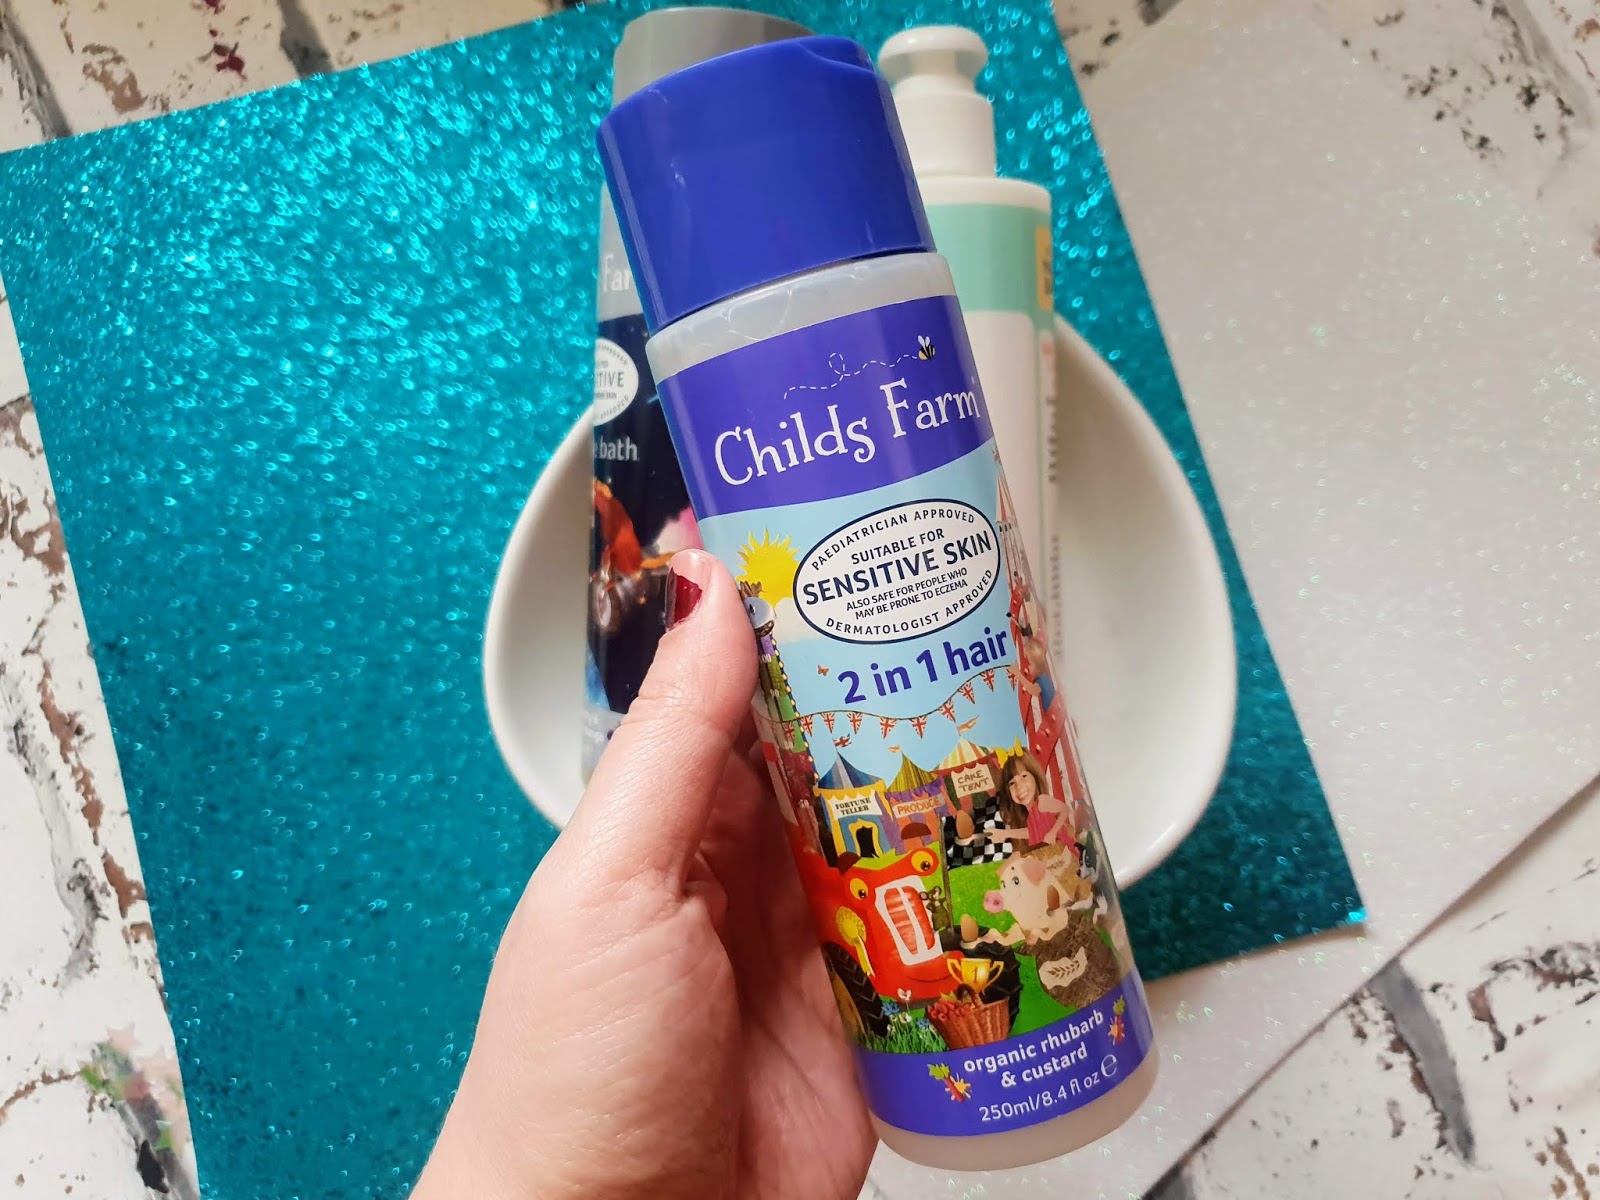 Child's Farm Products | Review  